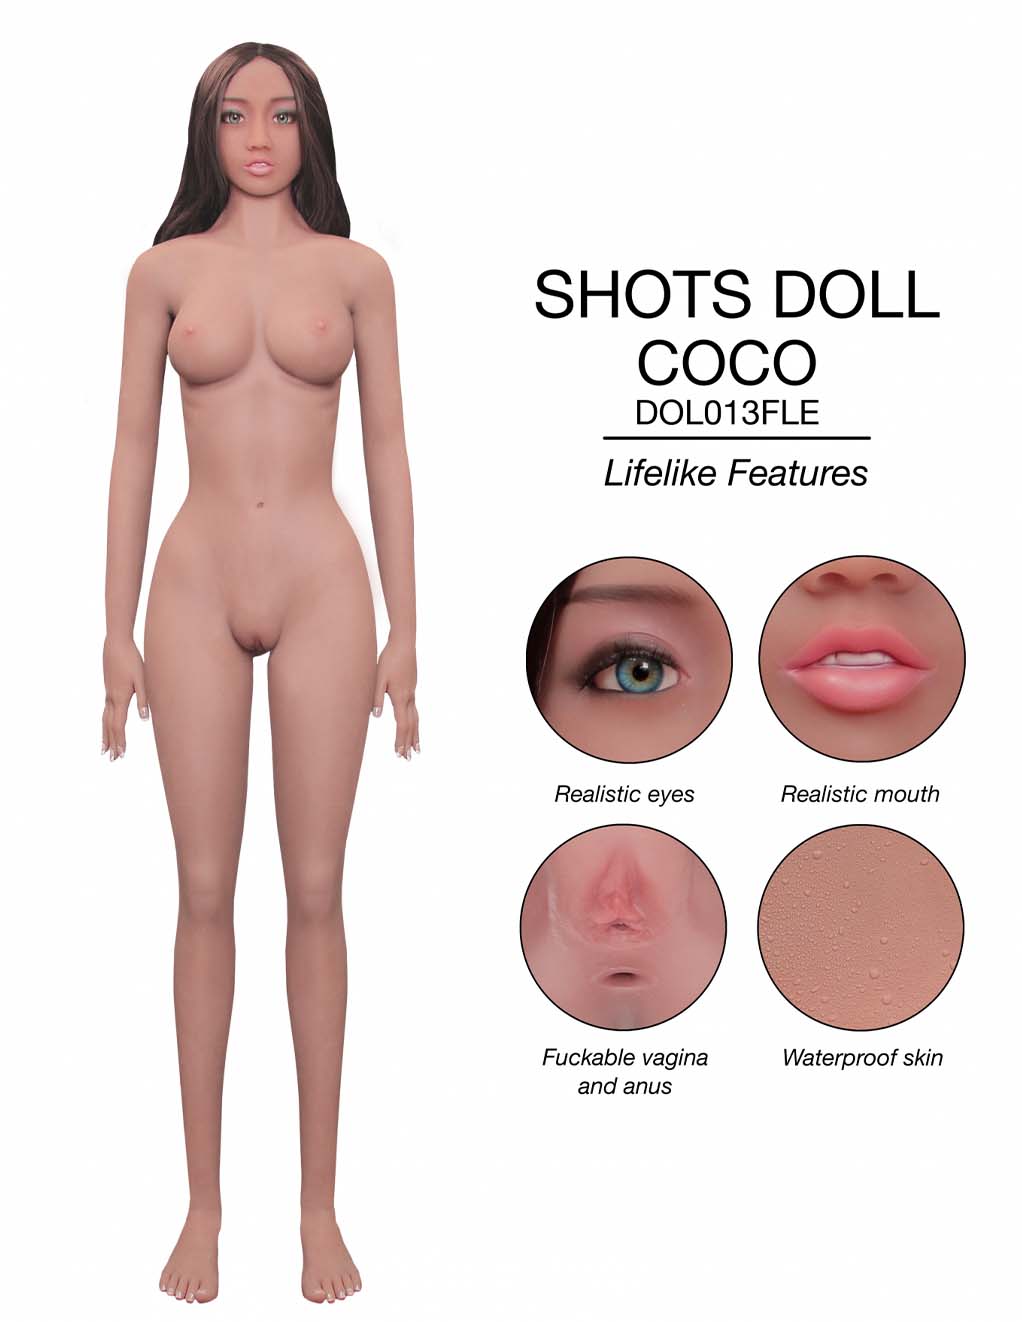 Shots Doll Coco- features